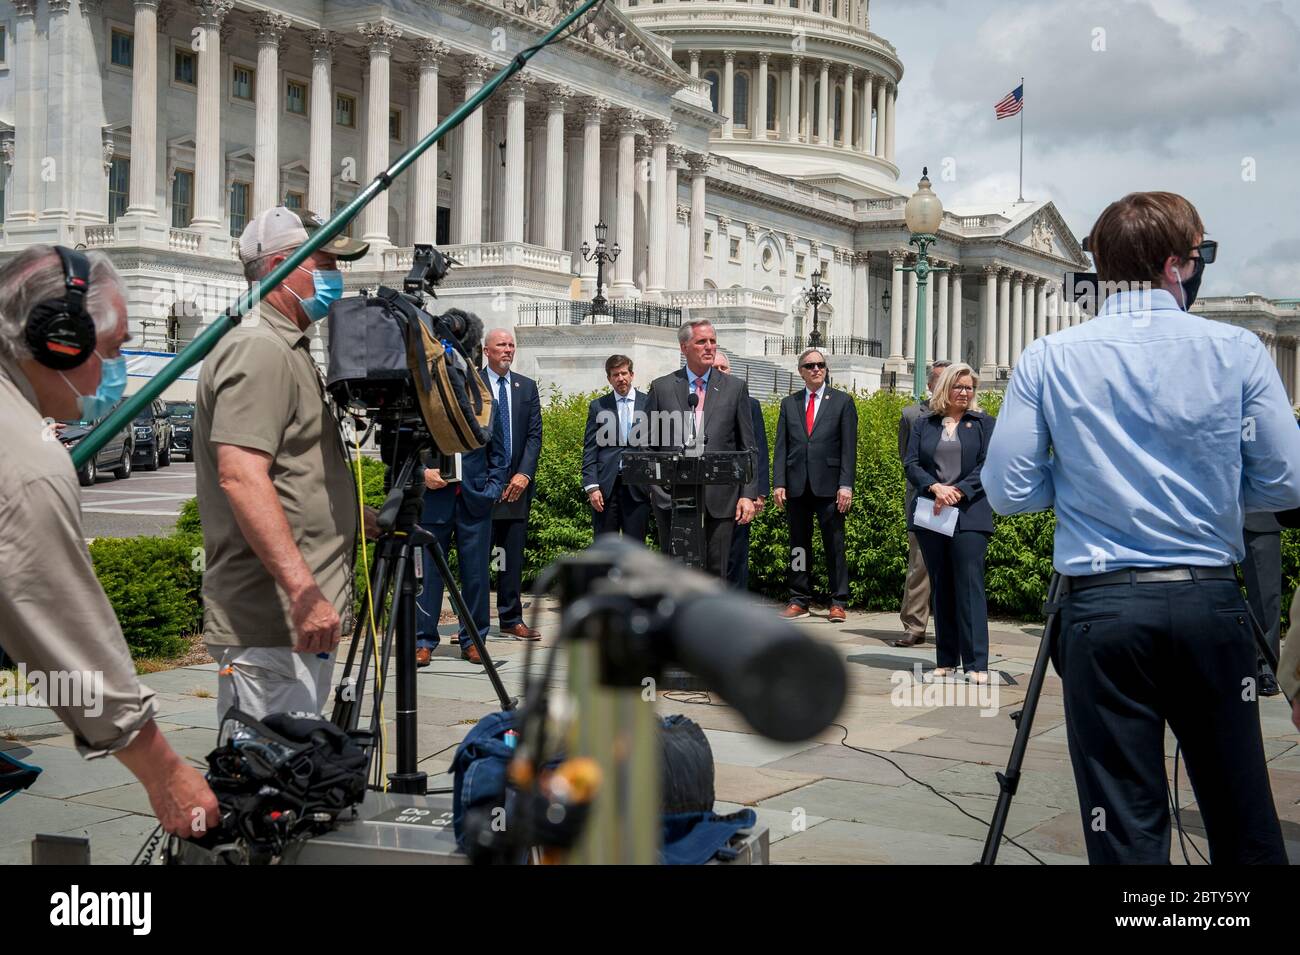 House Minority Leader Rep. Kevin McCarthy (R-Calif.) holds a media availability with House Minority Whip Rep. Steve Scalise (R-LA), House GOP Conference Chairwoman Liz Cheney (R-WY) and others, to announce that Republican leaders have filed a lawsuit against House Speaker Nancy Pelosi and congressional officials in an effort to block the House of Representatives from using a proxy voting system to allow for remote voting during the coronavirus pandemic, outside of the U.S. Capitol in Washington, DC., Wednesday, May 27, 2020. Credit: Rod Lamkey / CNP /MediaPunch Stock Photo